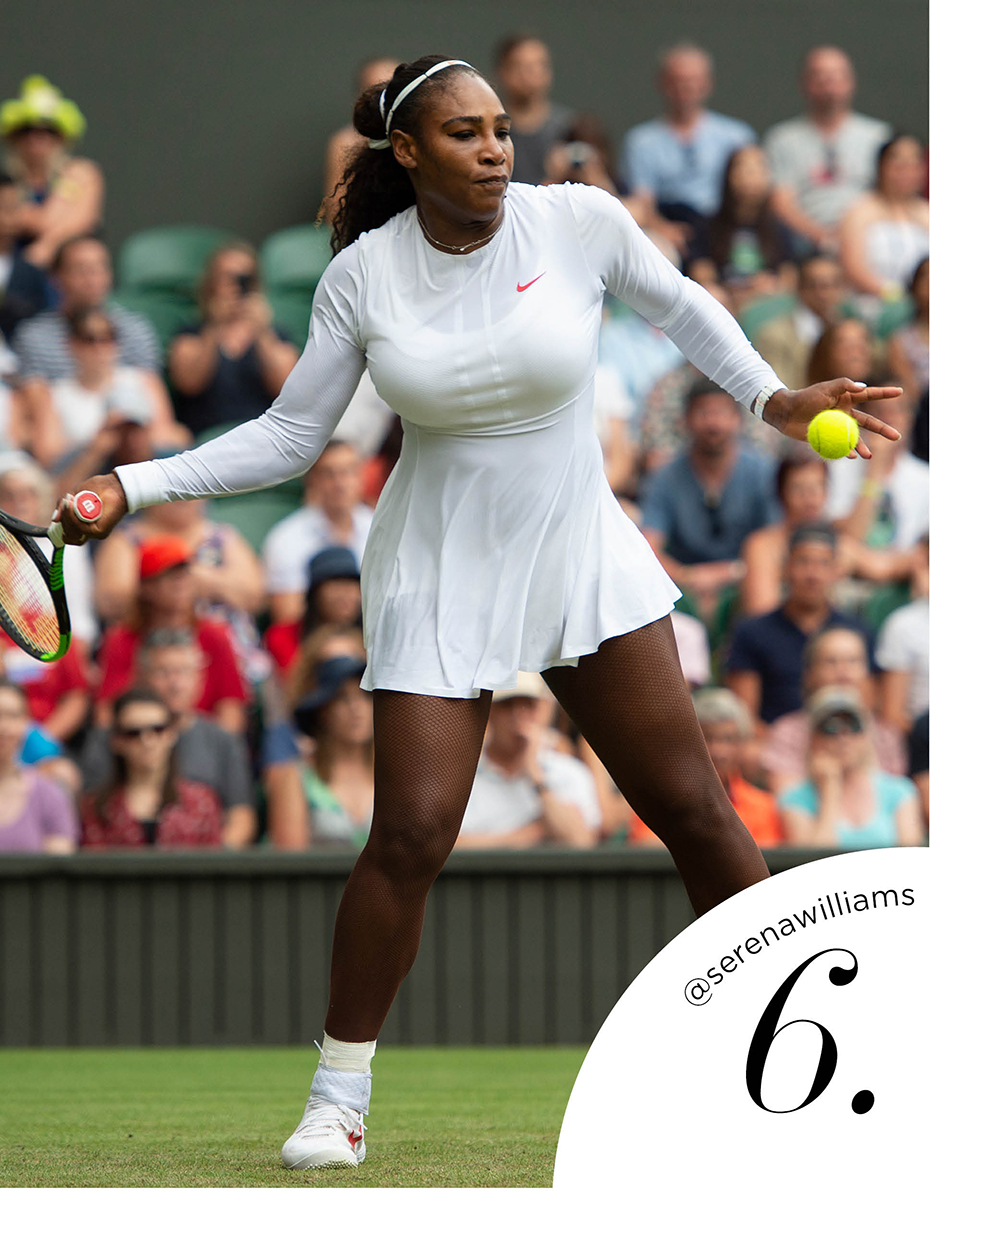 Serena Williams Serena Williams’s controversial sporting outfits made the US Open a huge fashion moment this year. Her Off-White x Nike ensemble caused a surge in demand for black tennis outfits week on week and searches for ‘black tennis skirts’ and ‘black tennis dresses’ increased by 108%. In 2017, this post was claimed Melania Trump. Nope, not a typo.